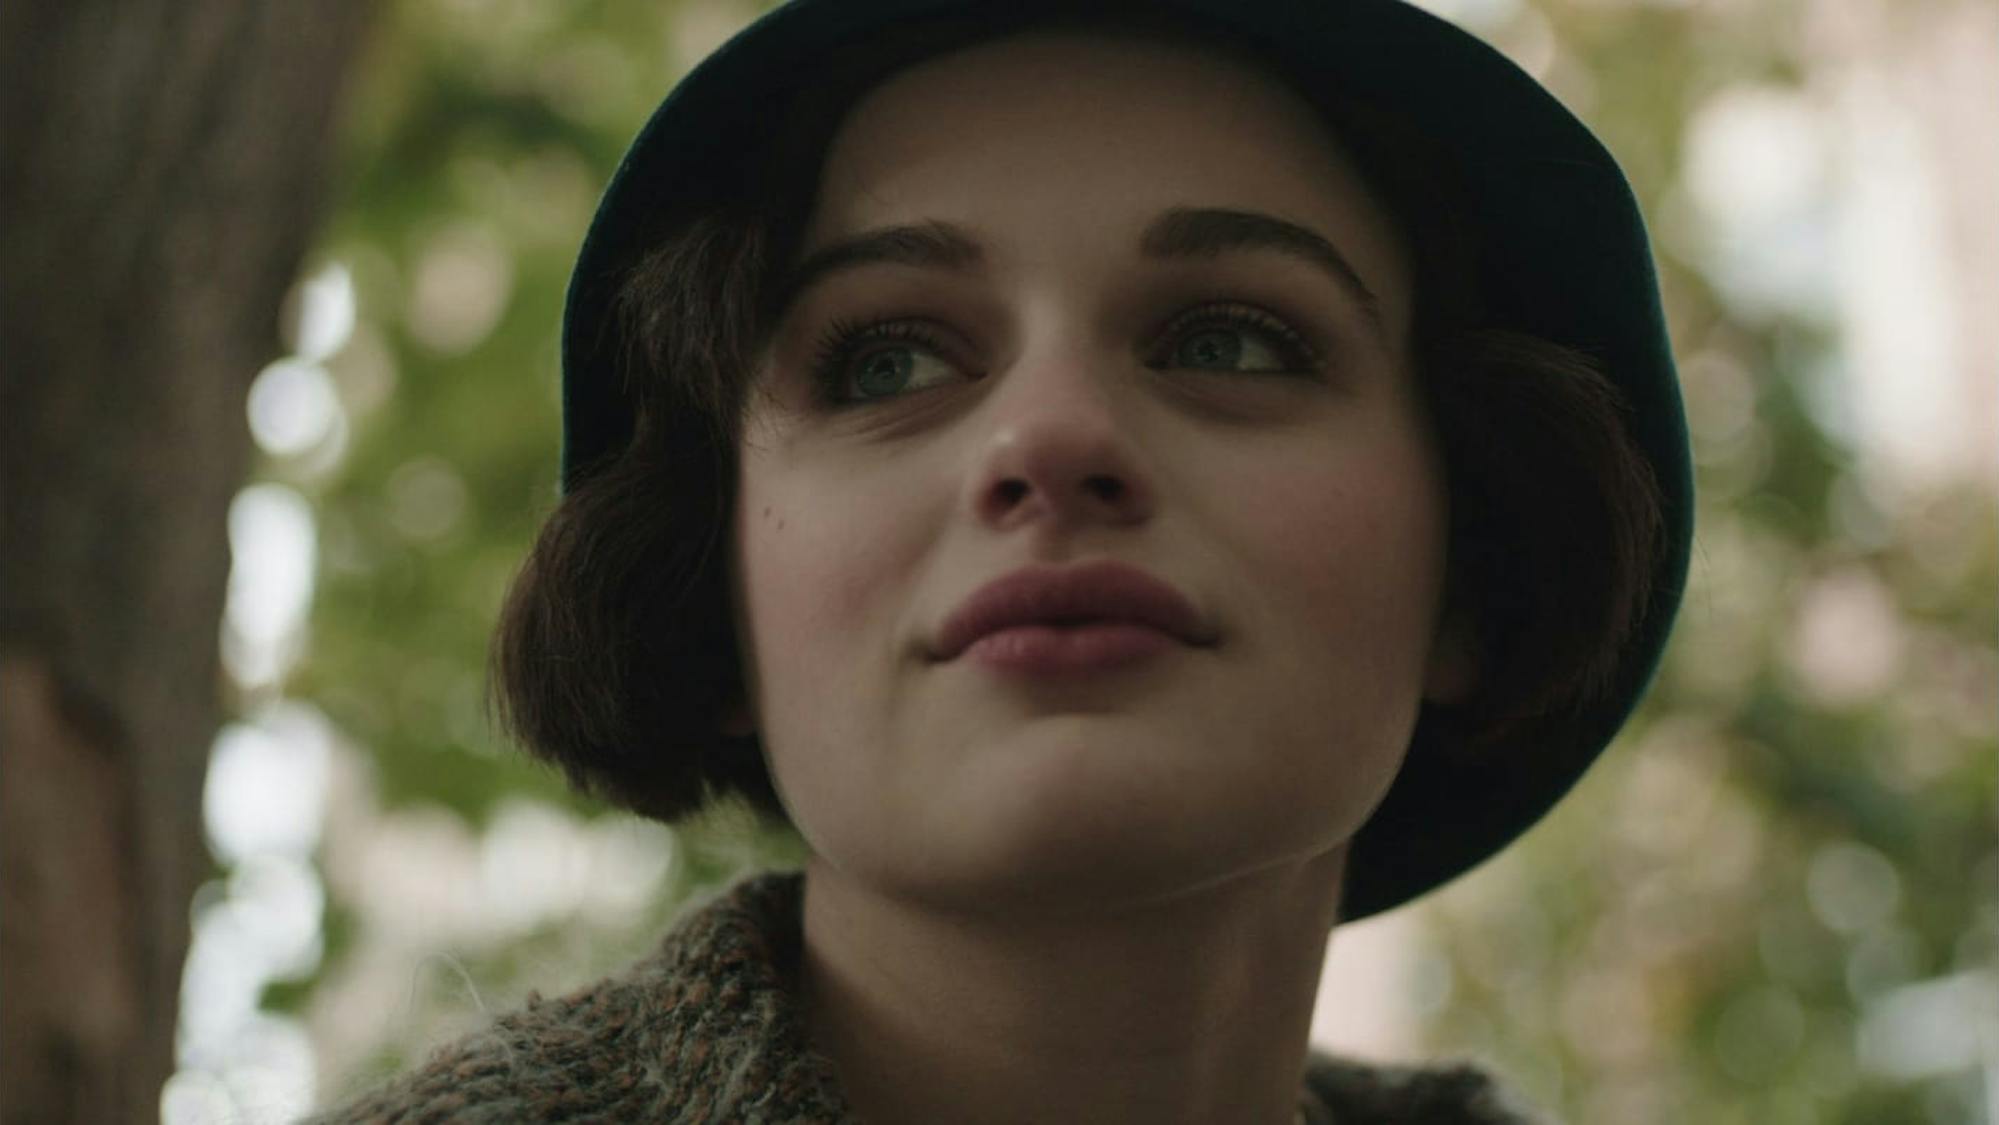 Bessie (Joey King) in Radium Girls wears a hat and red lipstick in this shot framed by etheral nature views.